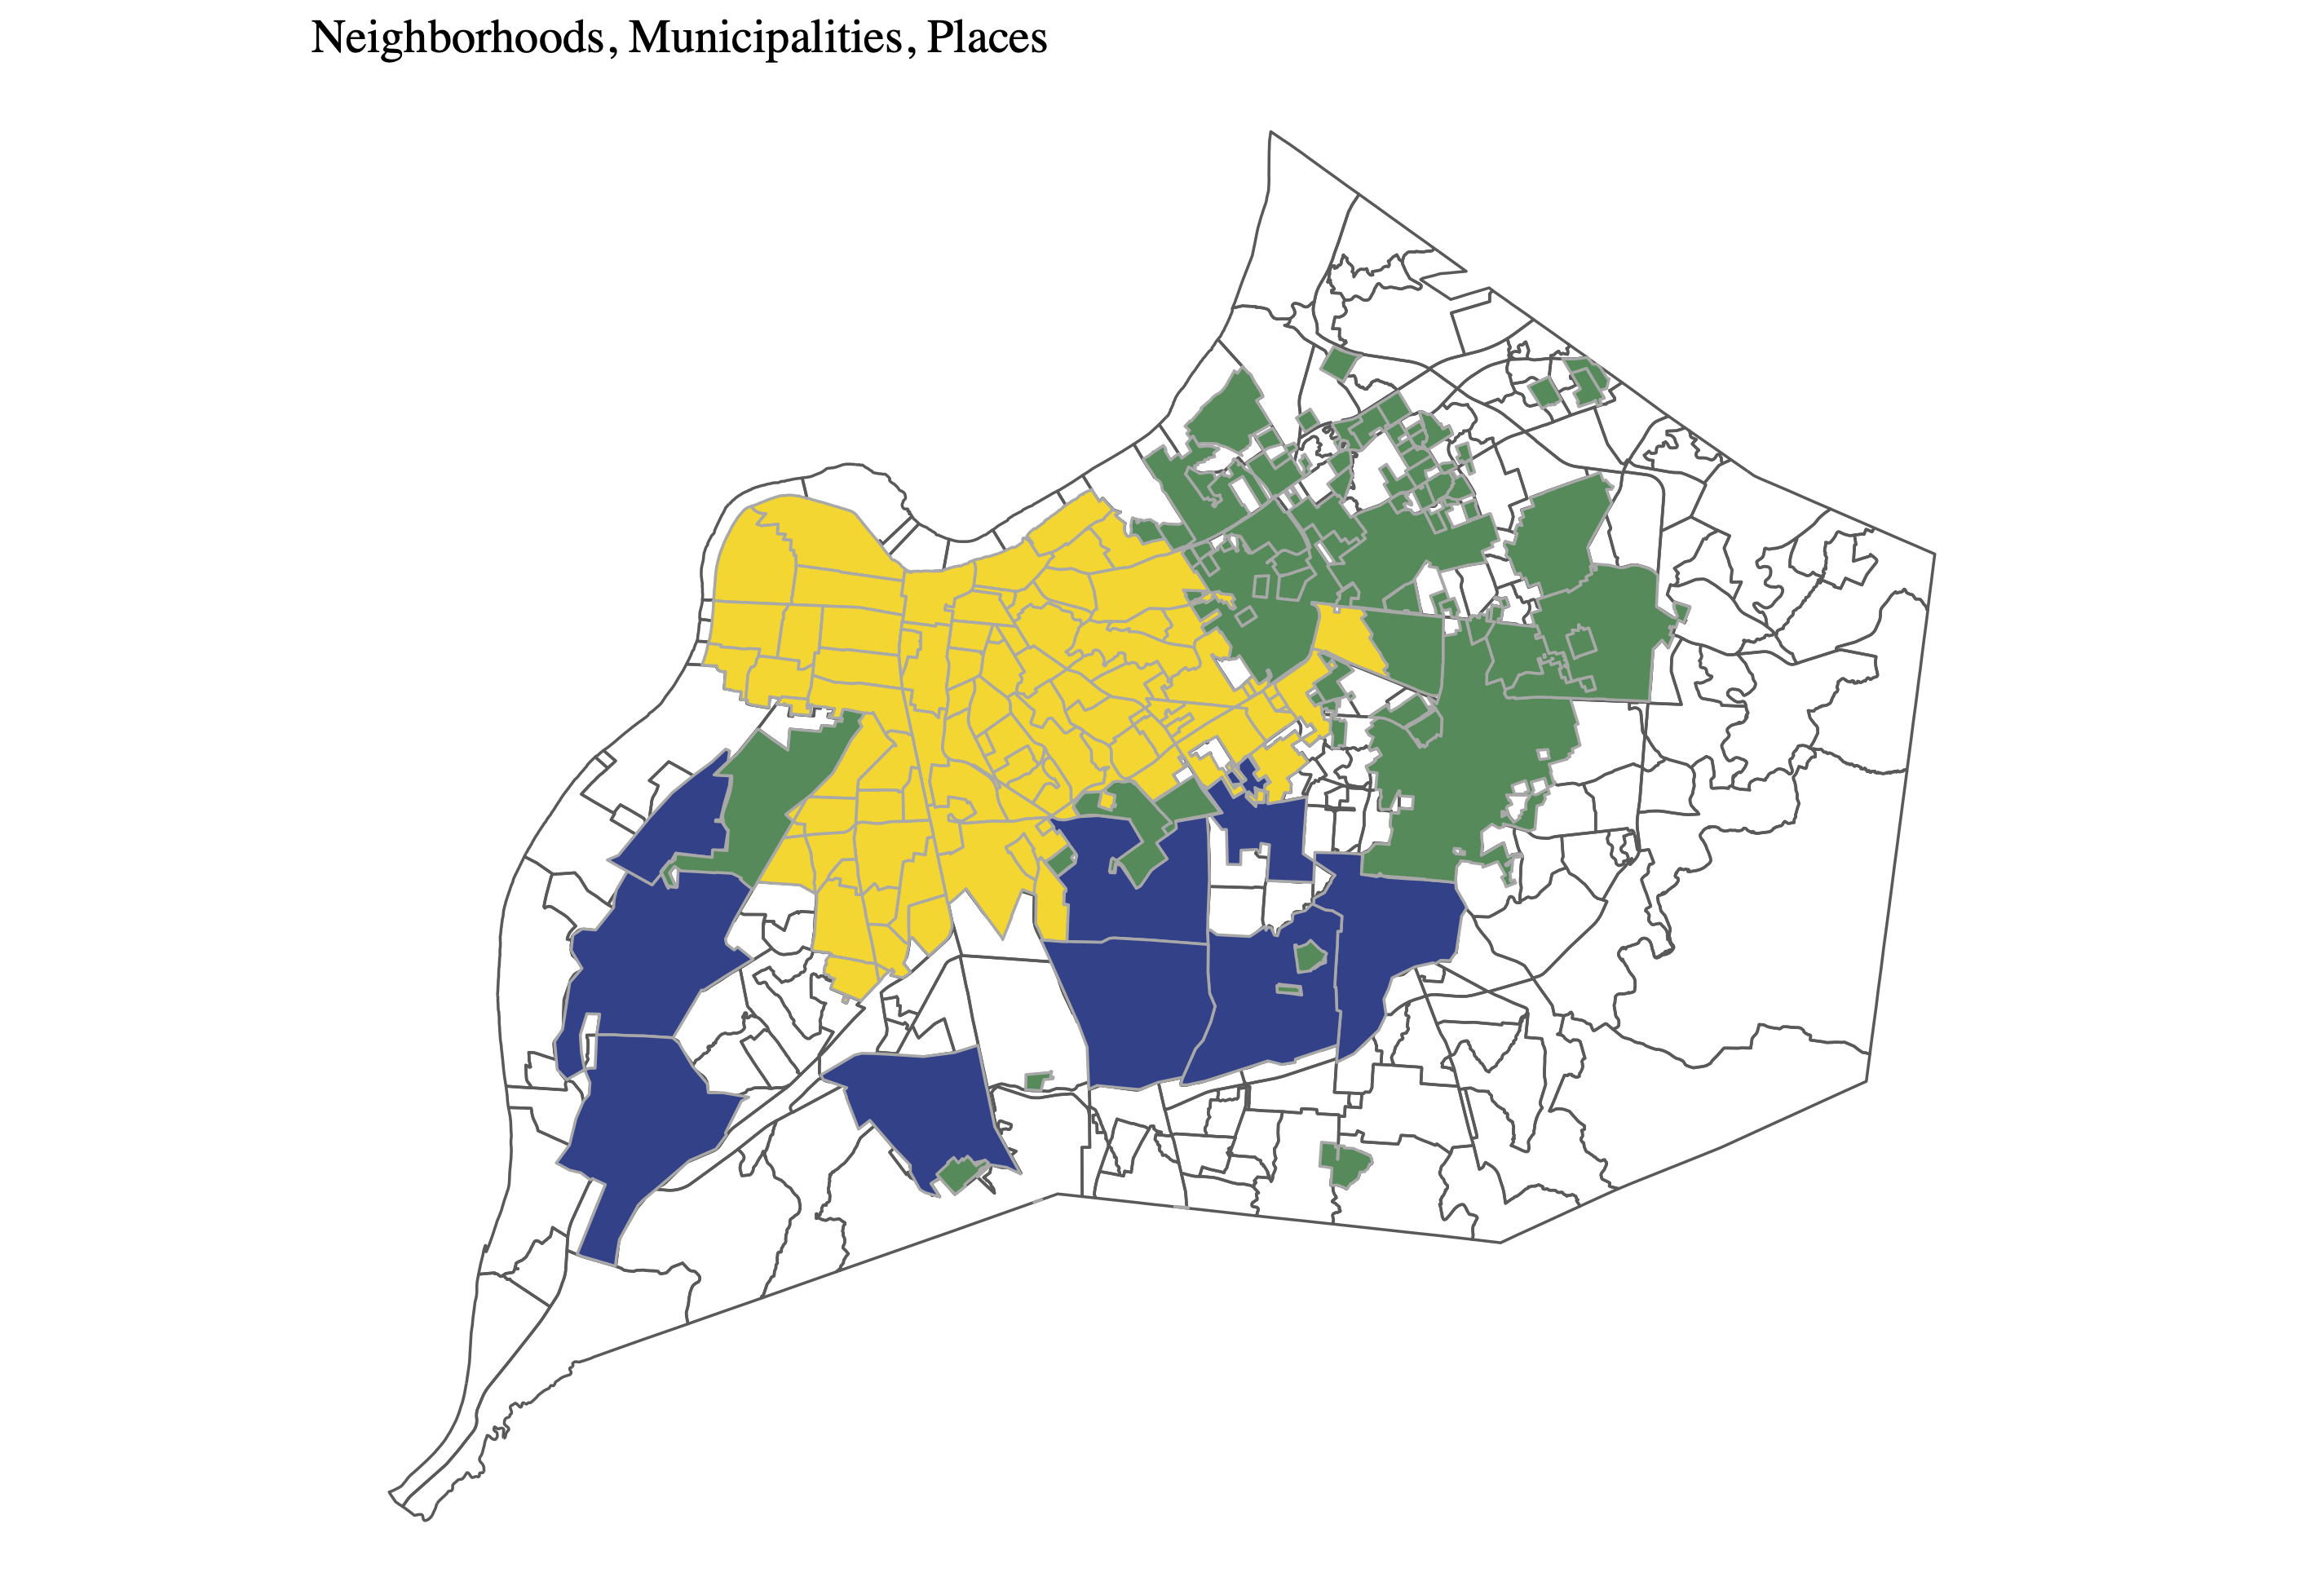 Figure 5: Neighborhoods used for redistricting simulations. Neighborhoods(yellow), Municipalities(green), and Places(blue).